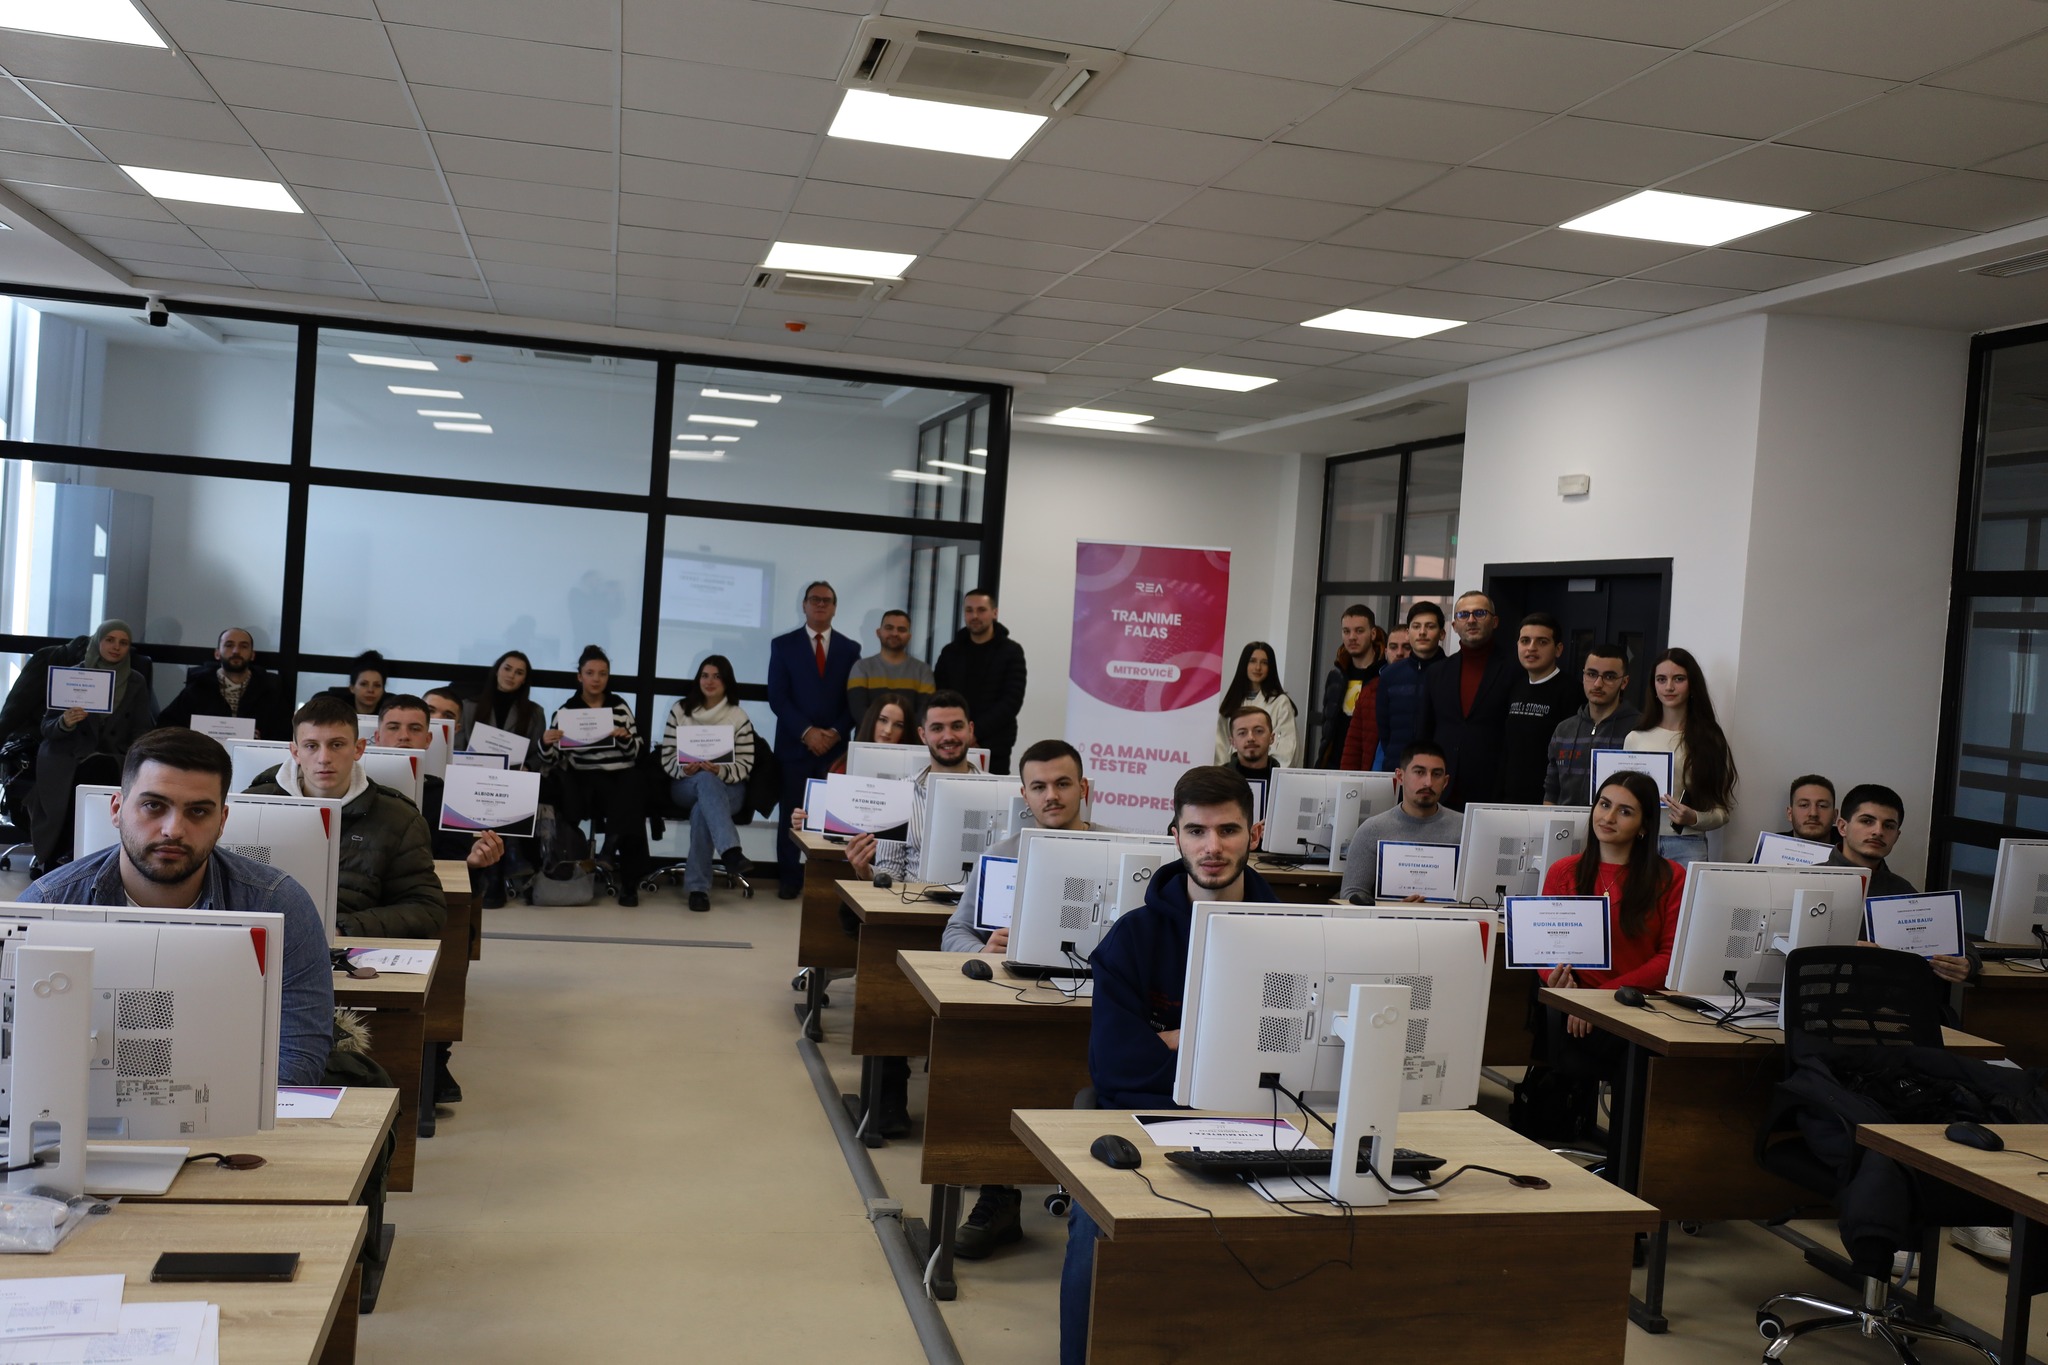 Successful Completion and Certification of 39 Young Trainees in WordPress and QA Manual Testing in Mitrovica